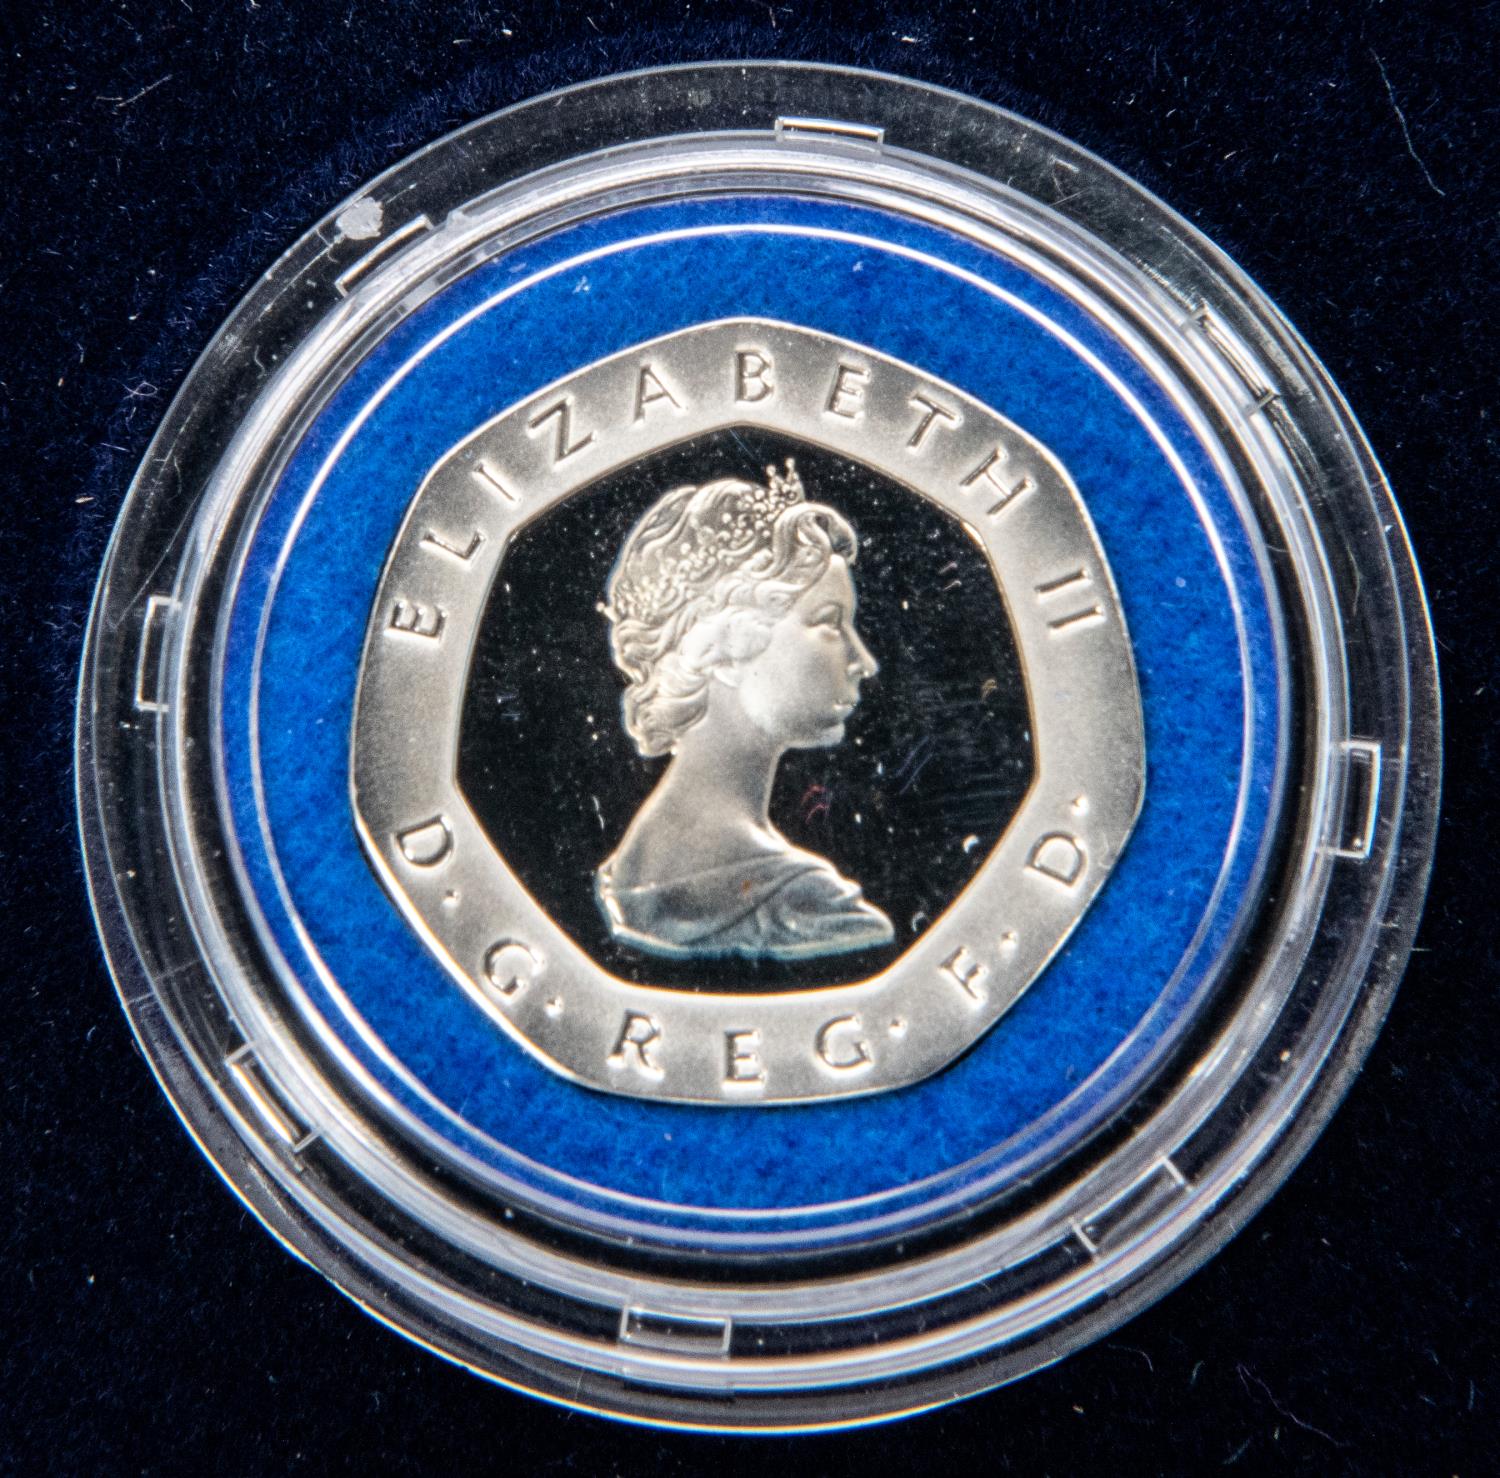 Elizabeth II silver proof issue £1 1988; Silver proof crown, 1981 commemorating the wedding of the - Image 3 of 11